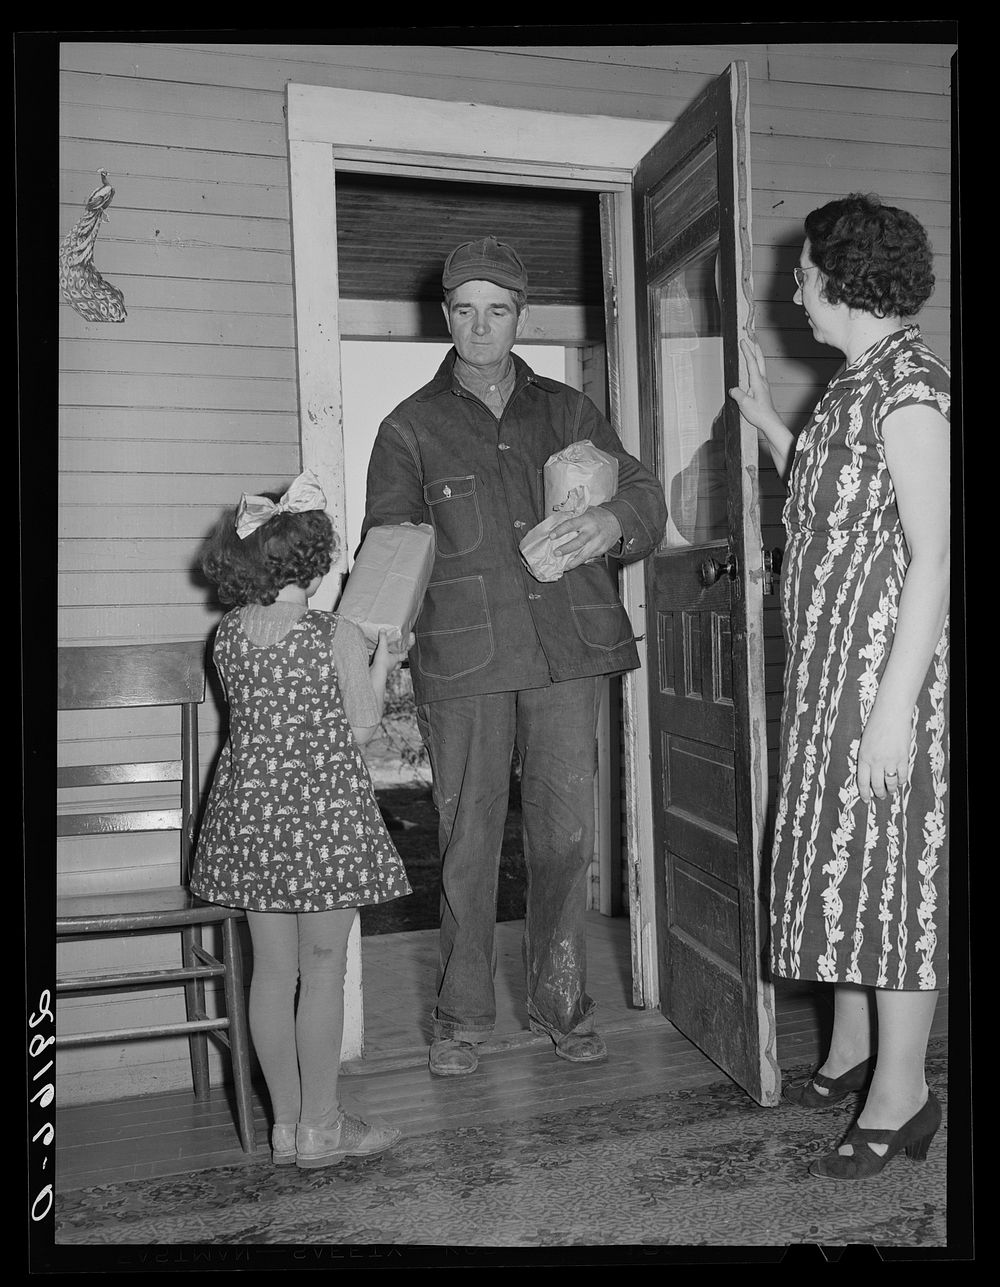 Farmer arrives home after shopping in town. Greene County, Missouri. Sourced from the Library of Congress.